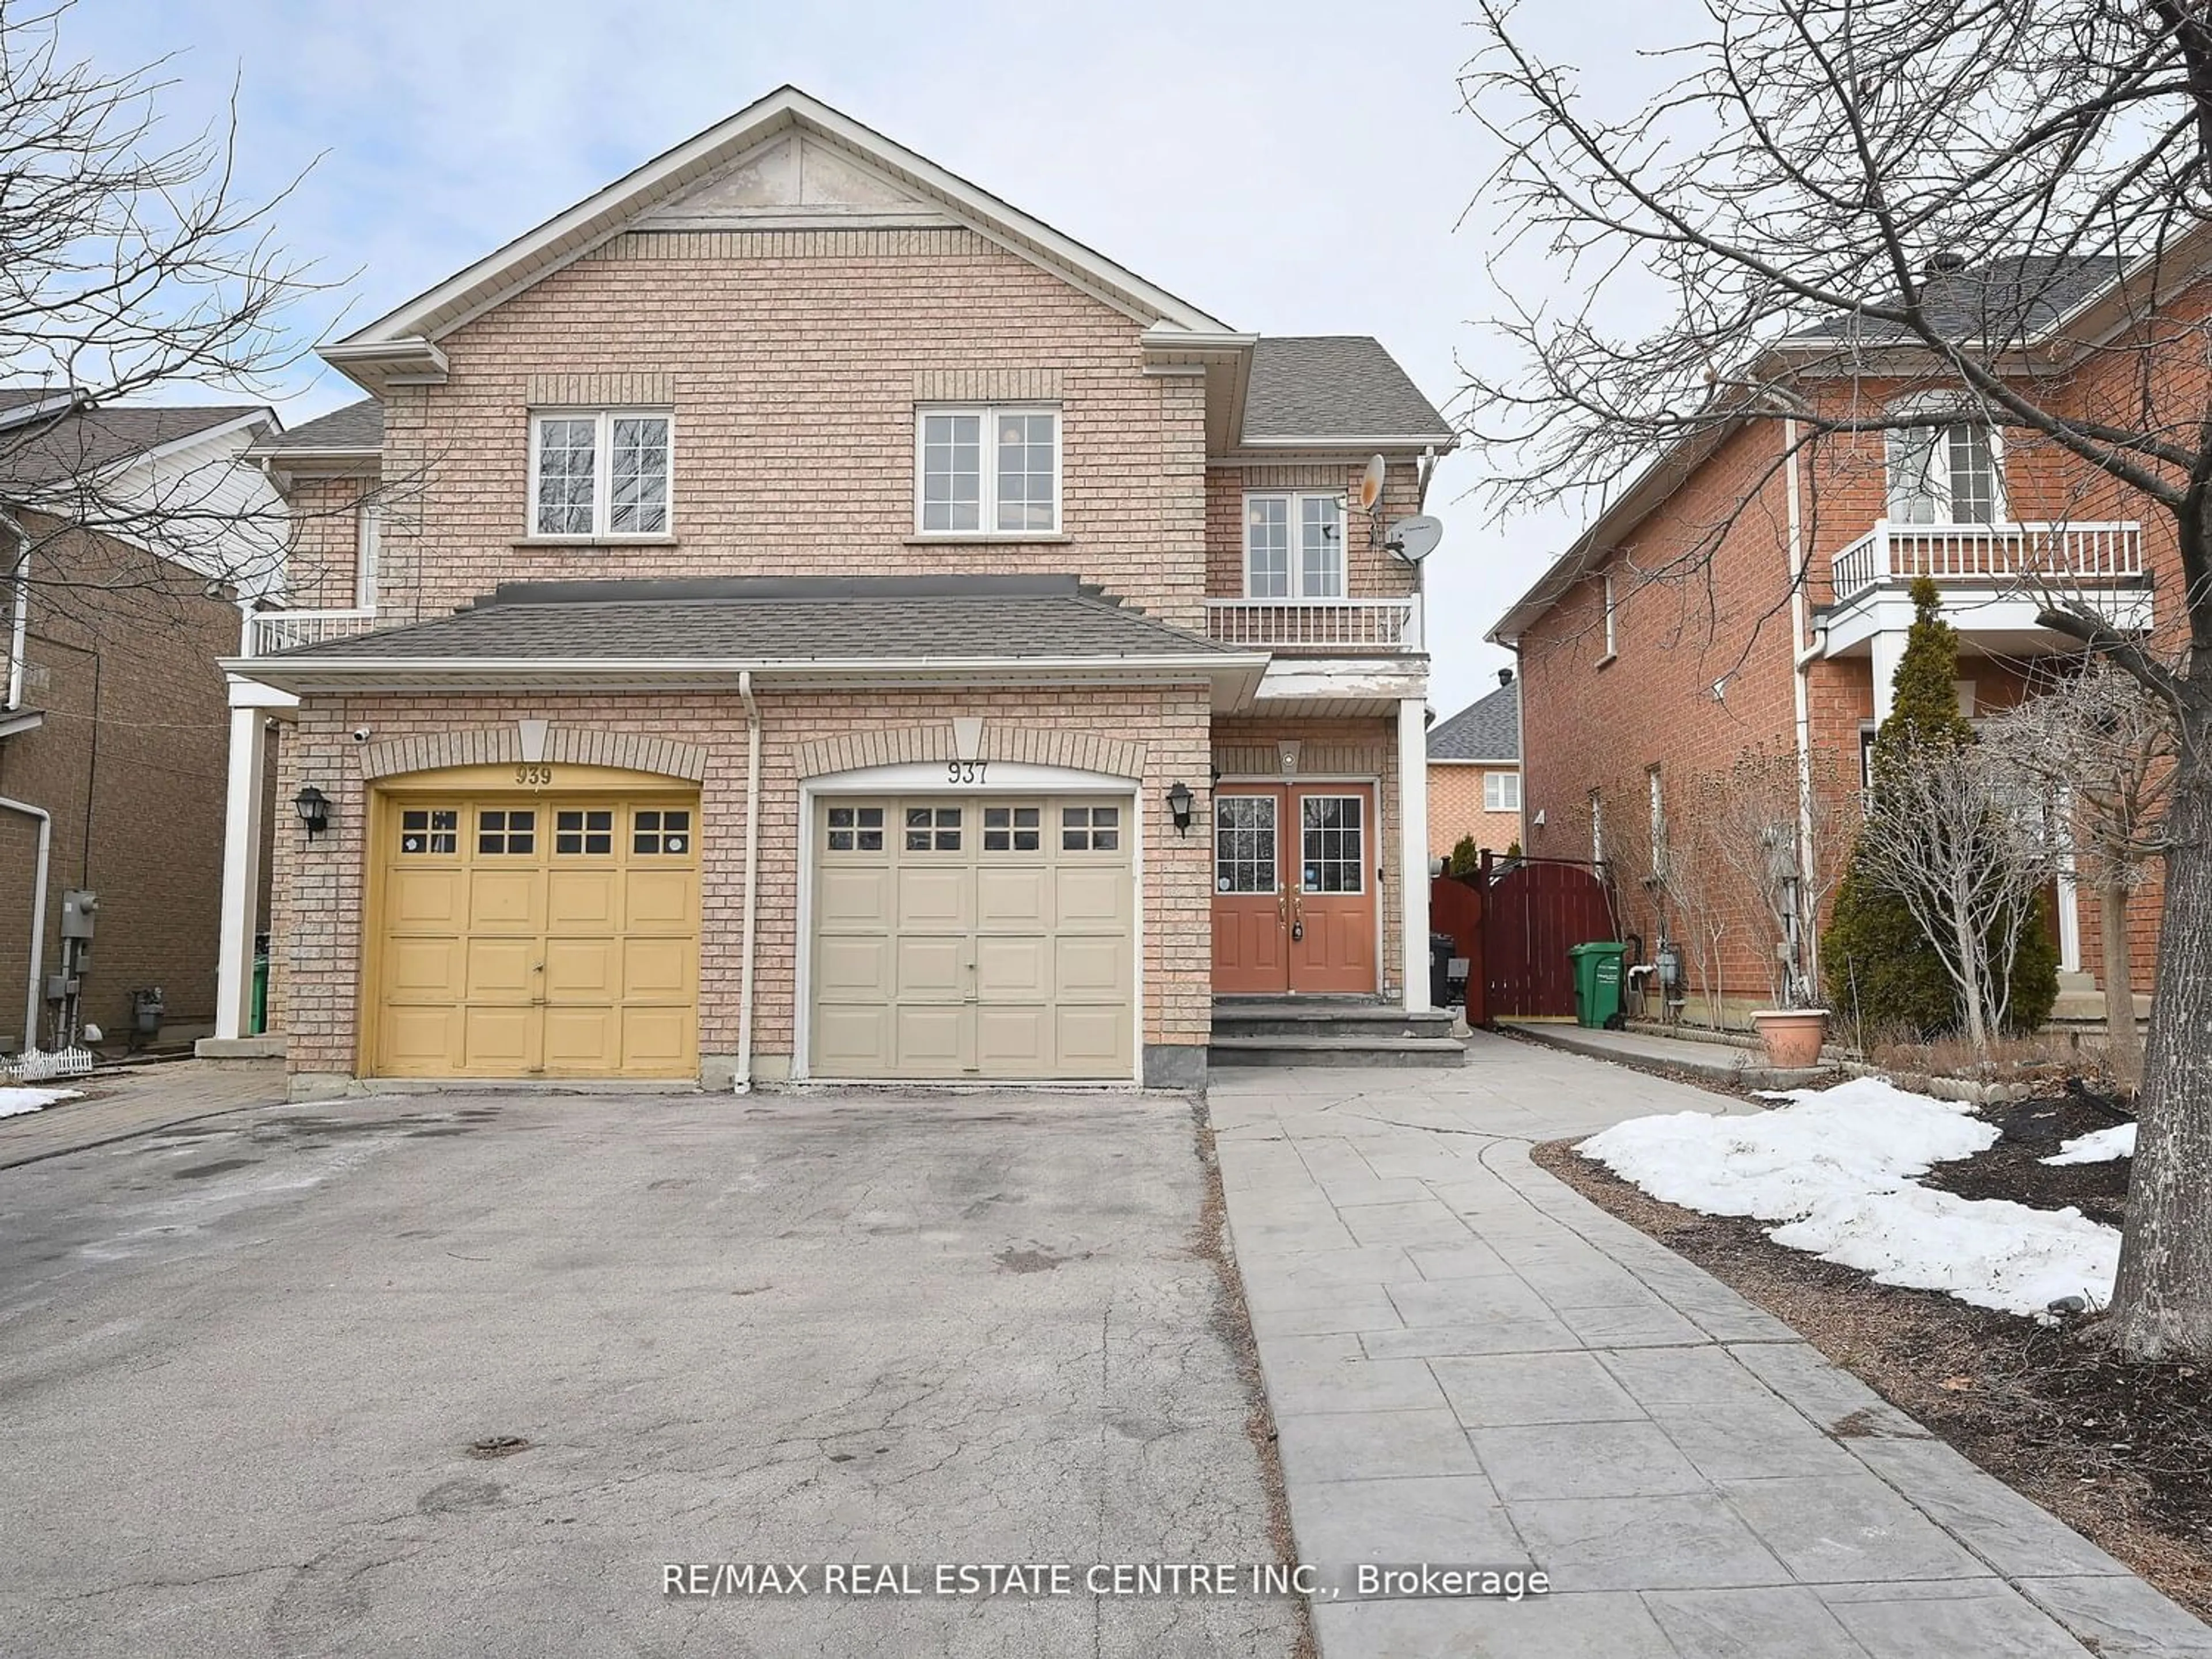 Home with brick exterior material for 937 Tambourine Terr, Mississauga Ontario L5W 1S5